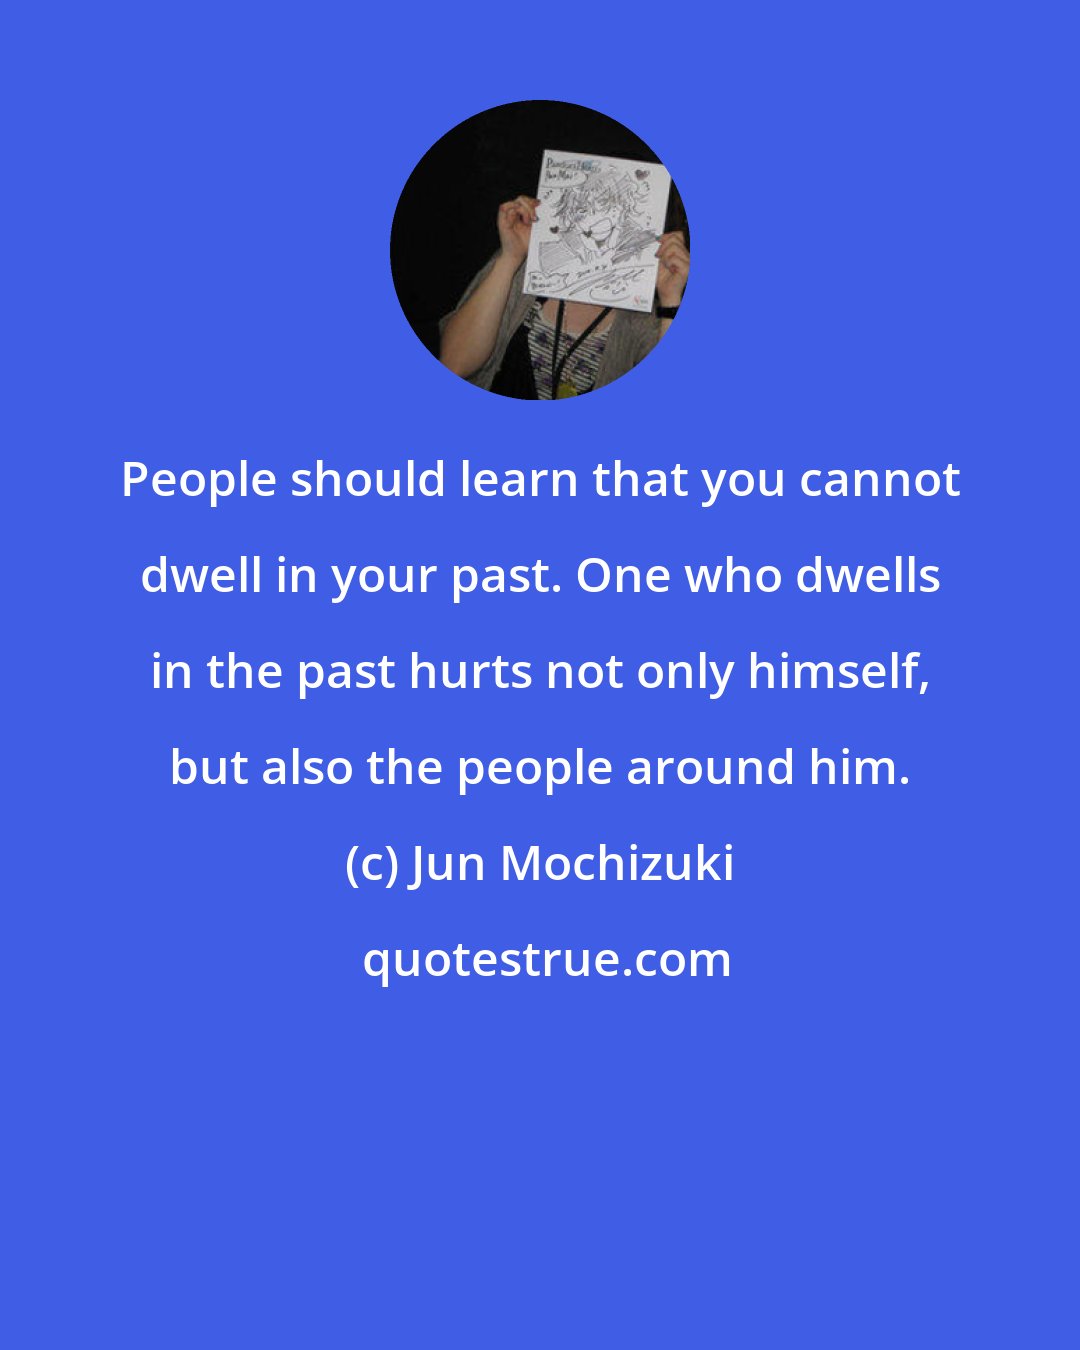 Jun Mochizuki: People should learn that you cannot dwell in your past. One who dwells in the past hurts not only himself, but also the people around him.